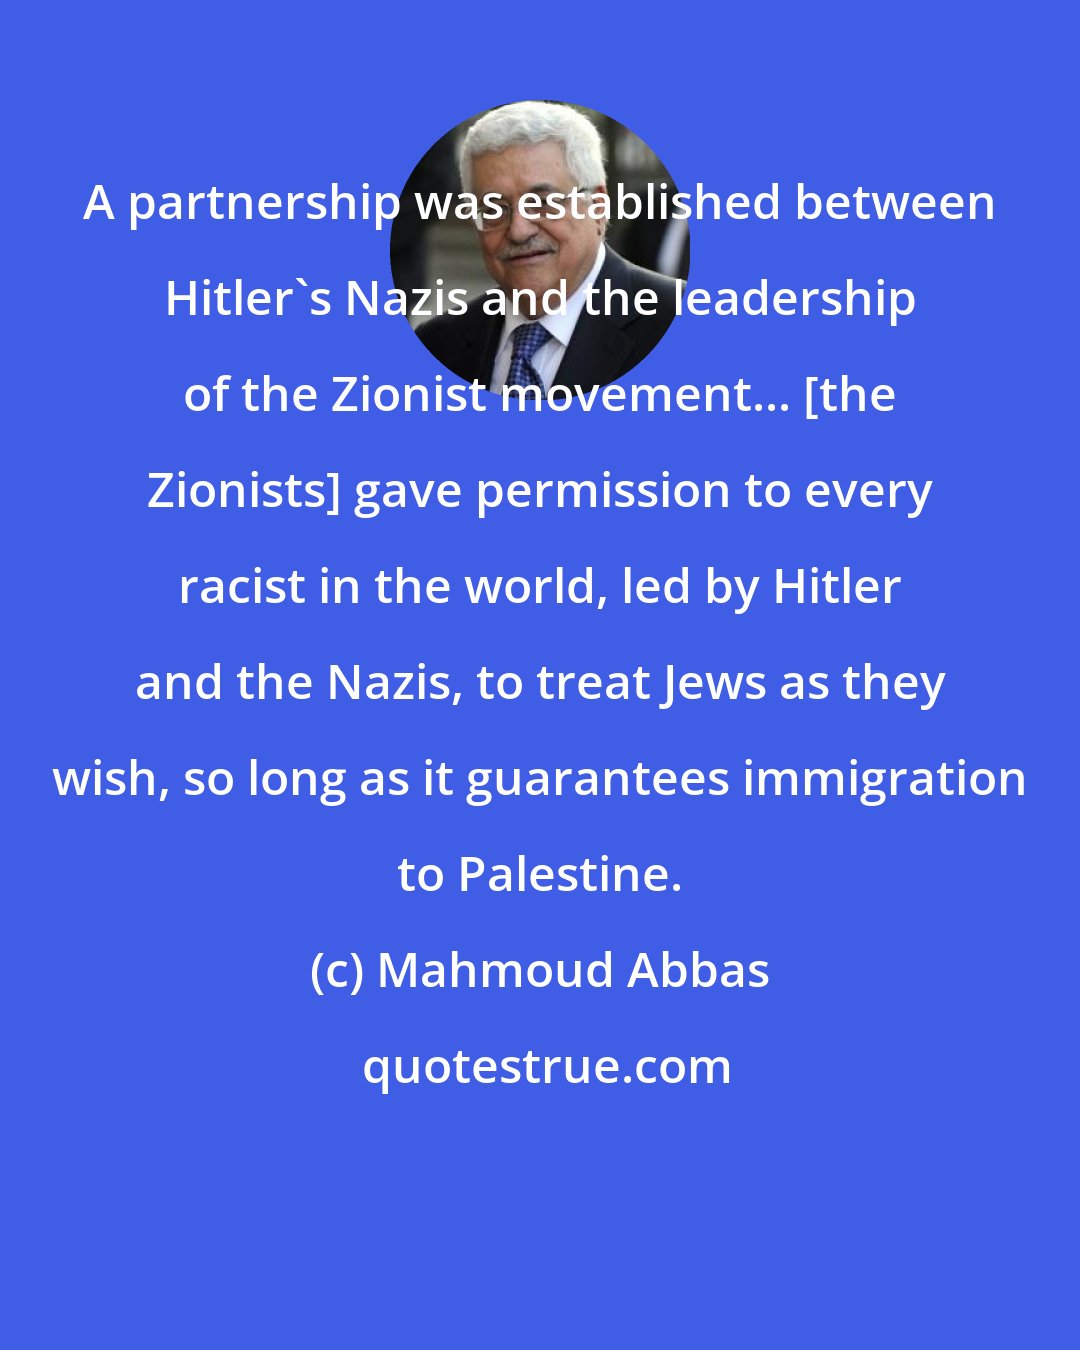 Mahmoud Abbas: A partnership was established between Hitler's Nazis and the leadership of the Zionist movement... [the Zionists] gave permission to every racist in the world, led by Hitler and the Nazis, to treat Jews as they wish, so long as it guarantees immigration to Palestine.